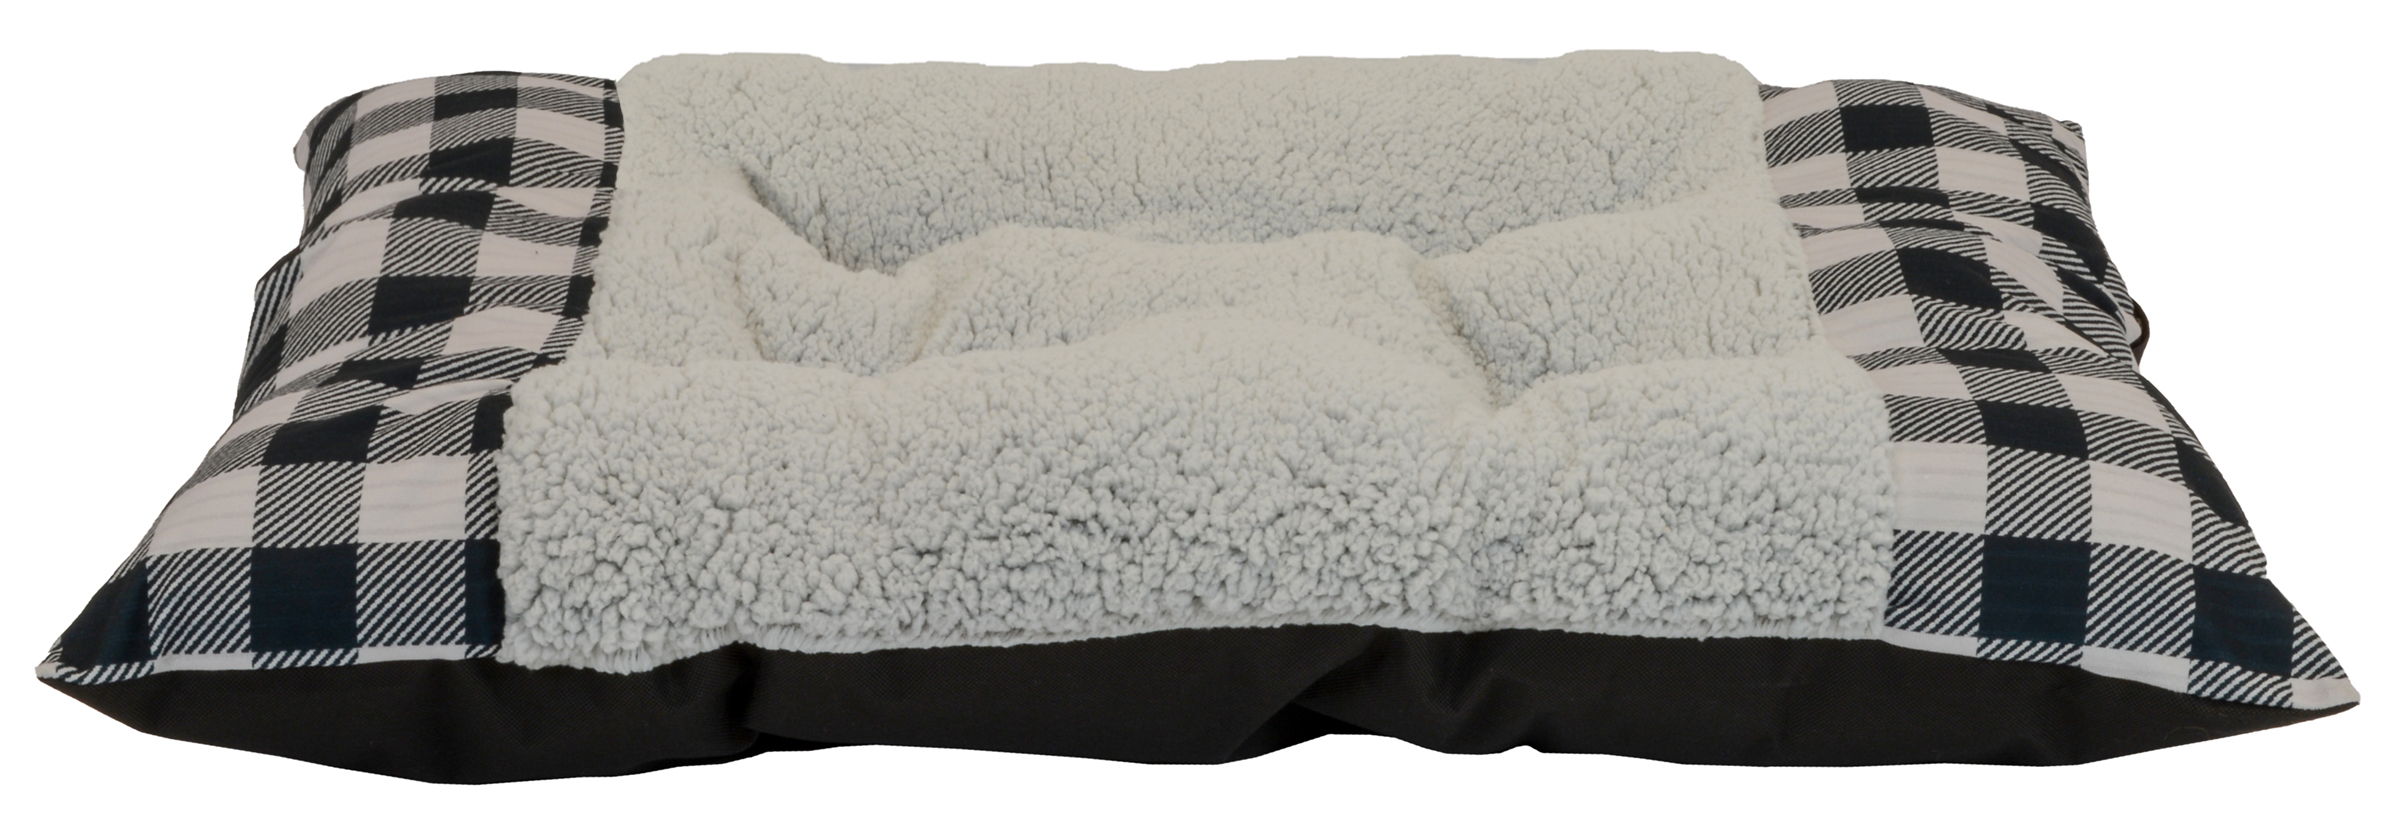 Holiday Time Plush Plaid Pet Bed, Gray, 27"L x 36"W x 3"H - image 3 of 3